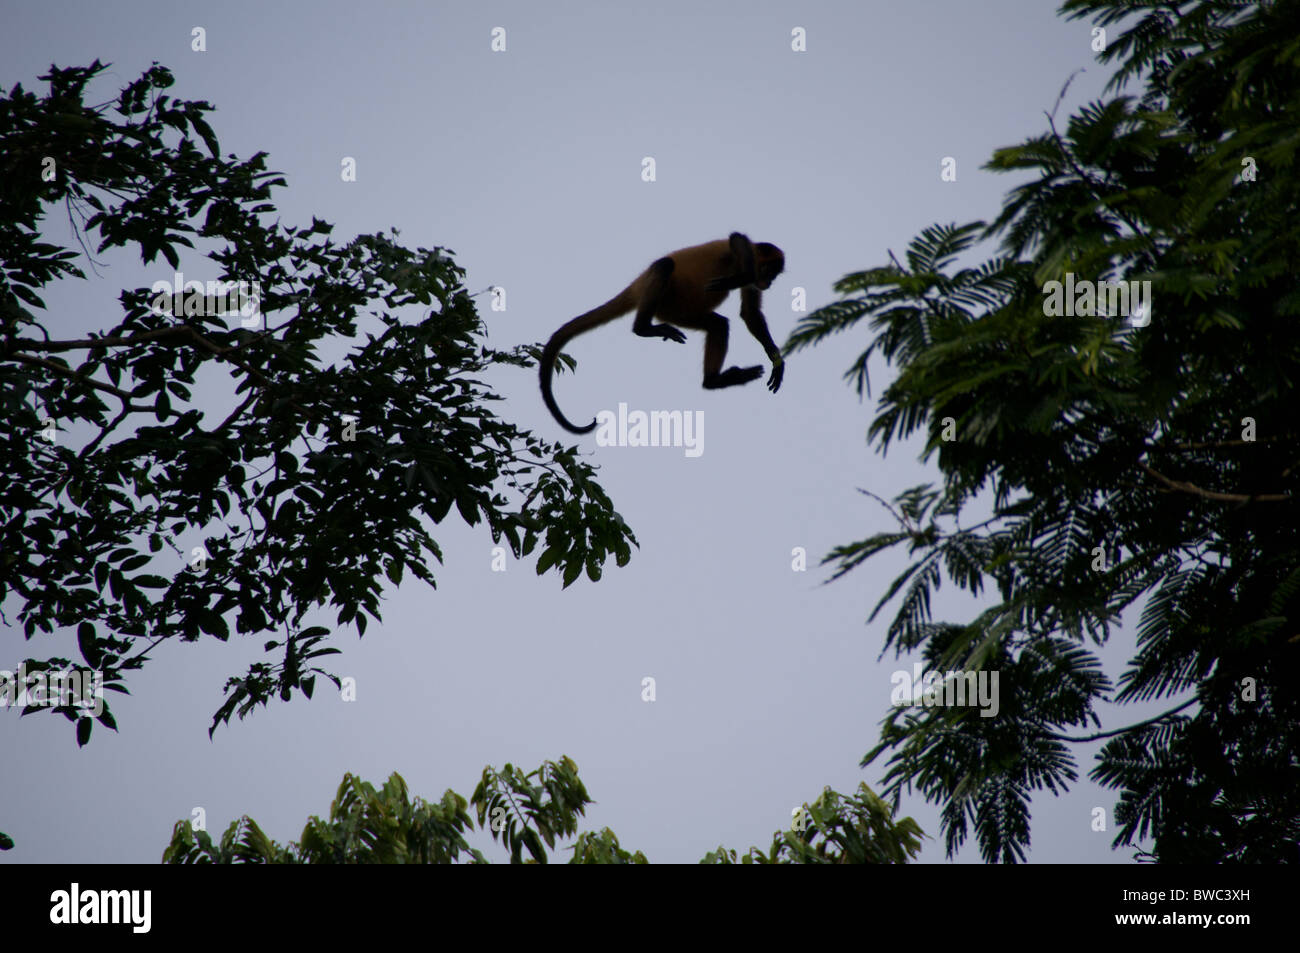 An Ornate Spider Monkey (Ateles geoffroyi ornatus) leaps from tree to tree in Tortugero National Park, Costa Rica. Stock Photo